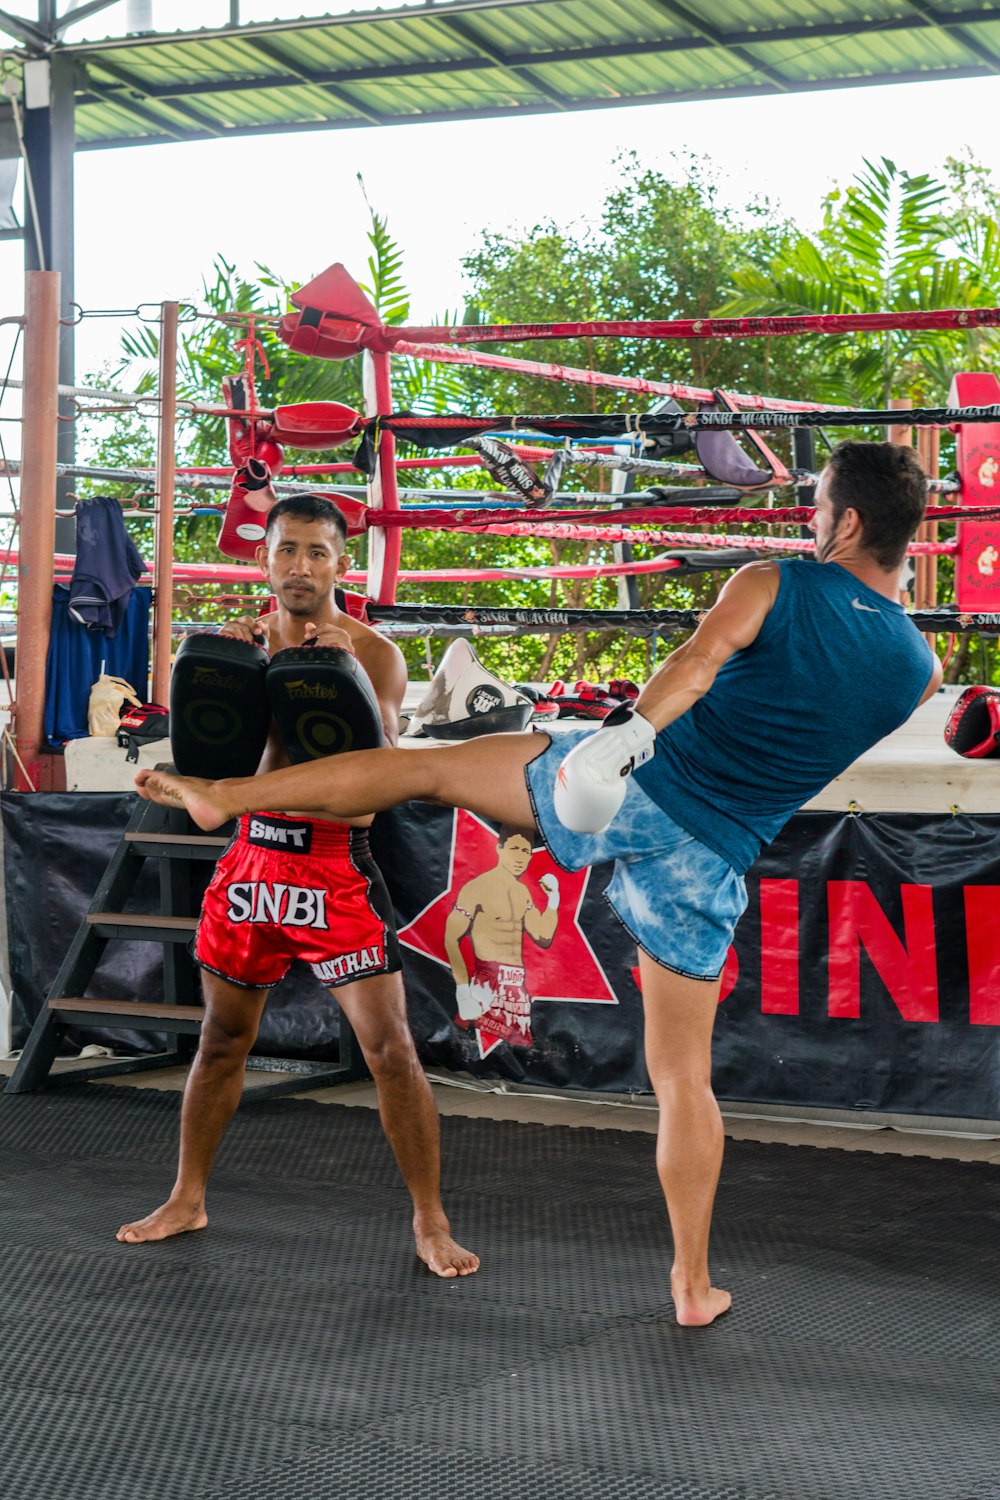 a man kicking another man with a kickbox